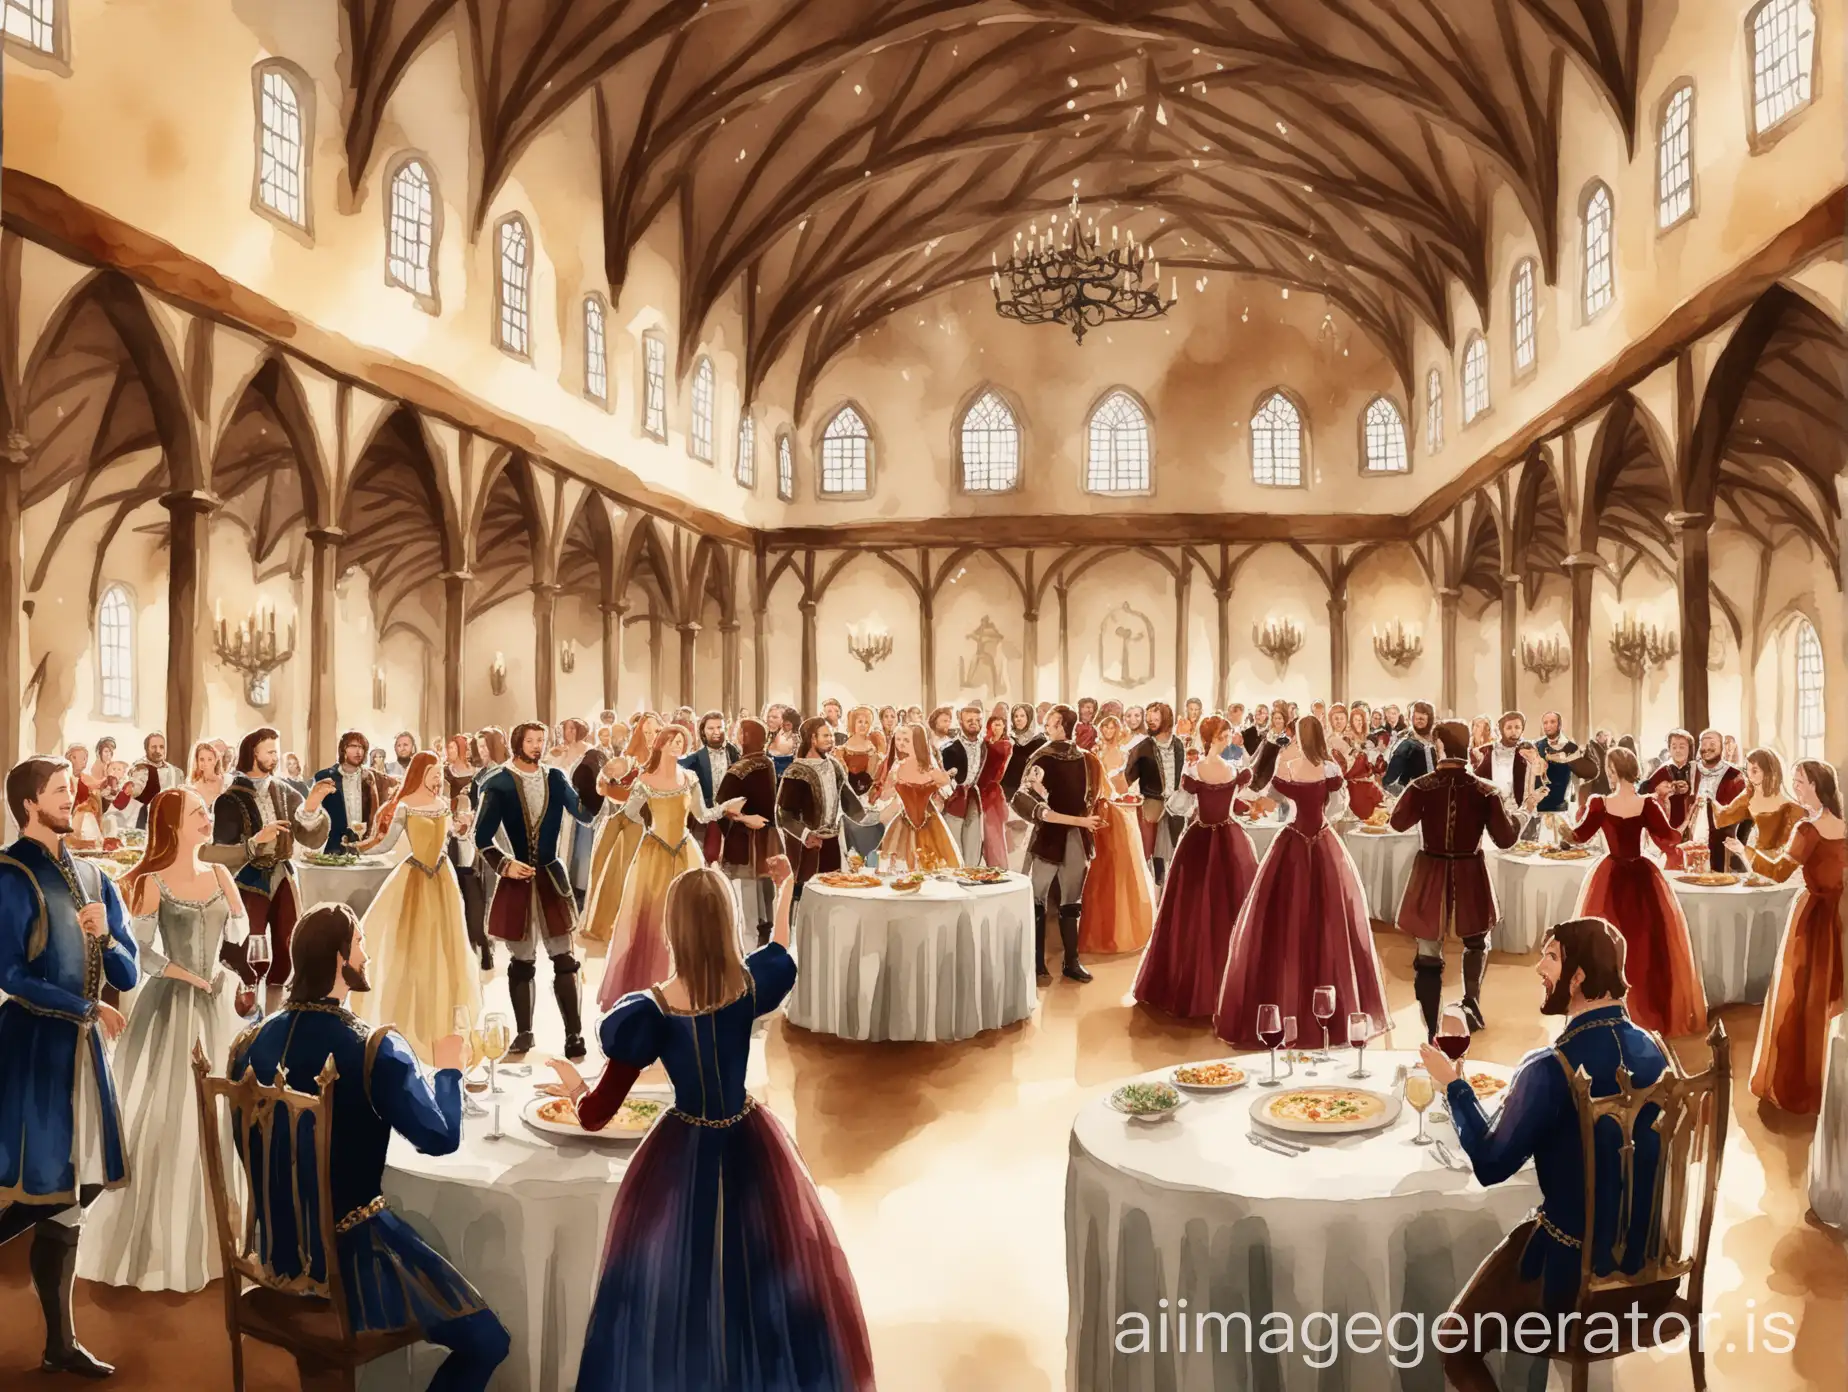 Drinking song, medieval European high society banquet, hall, singing and dancing, luxurious attire, people standing on both sides, a square table and open space in the middle, wine and food on the table, low saturation, scene as main focus, watercolor style